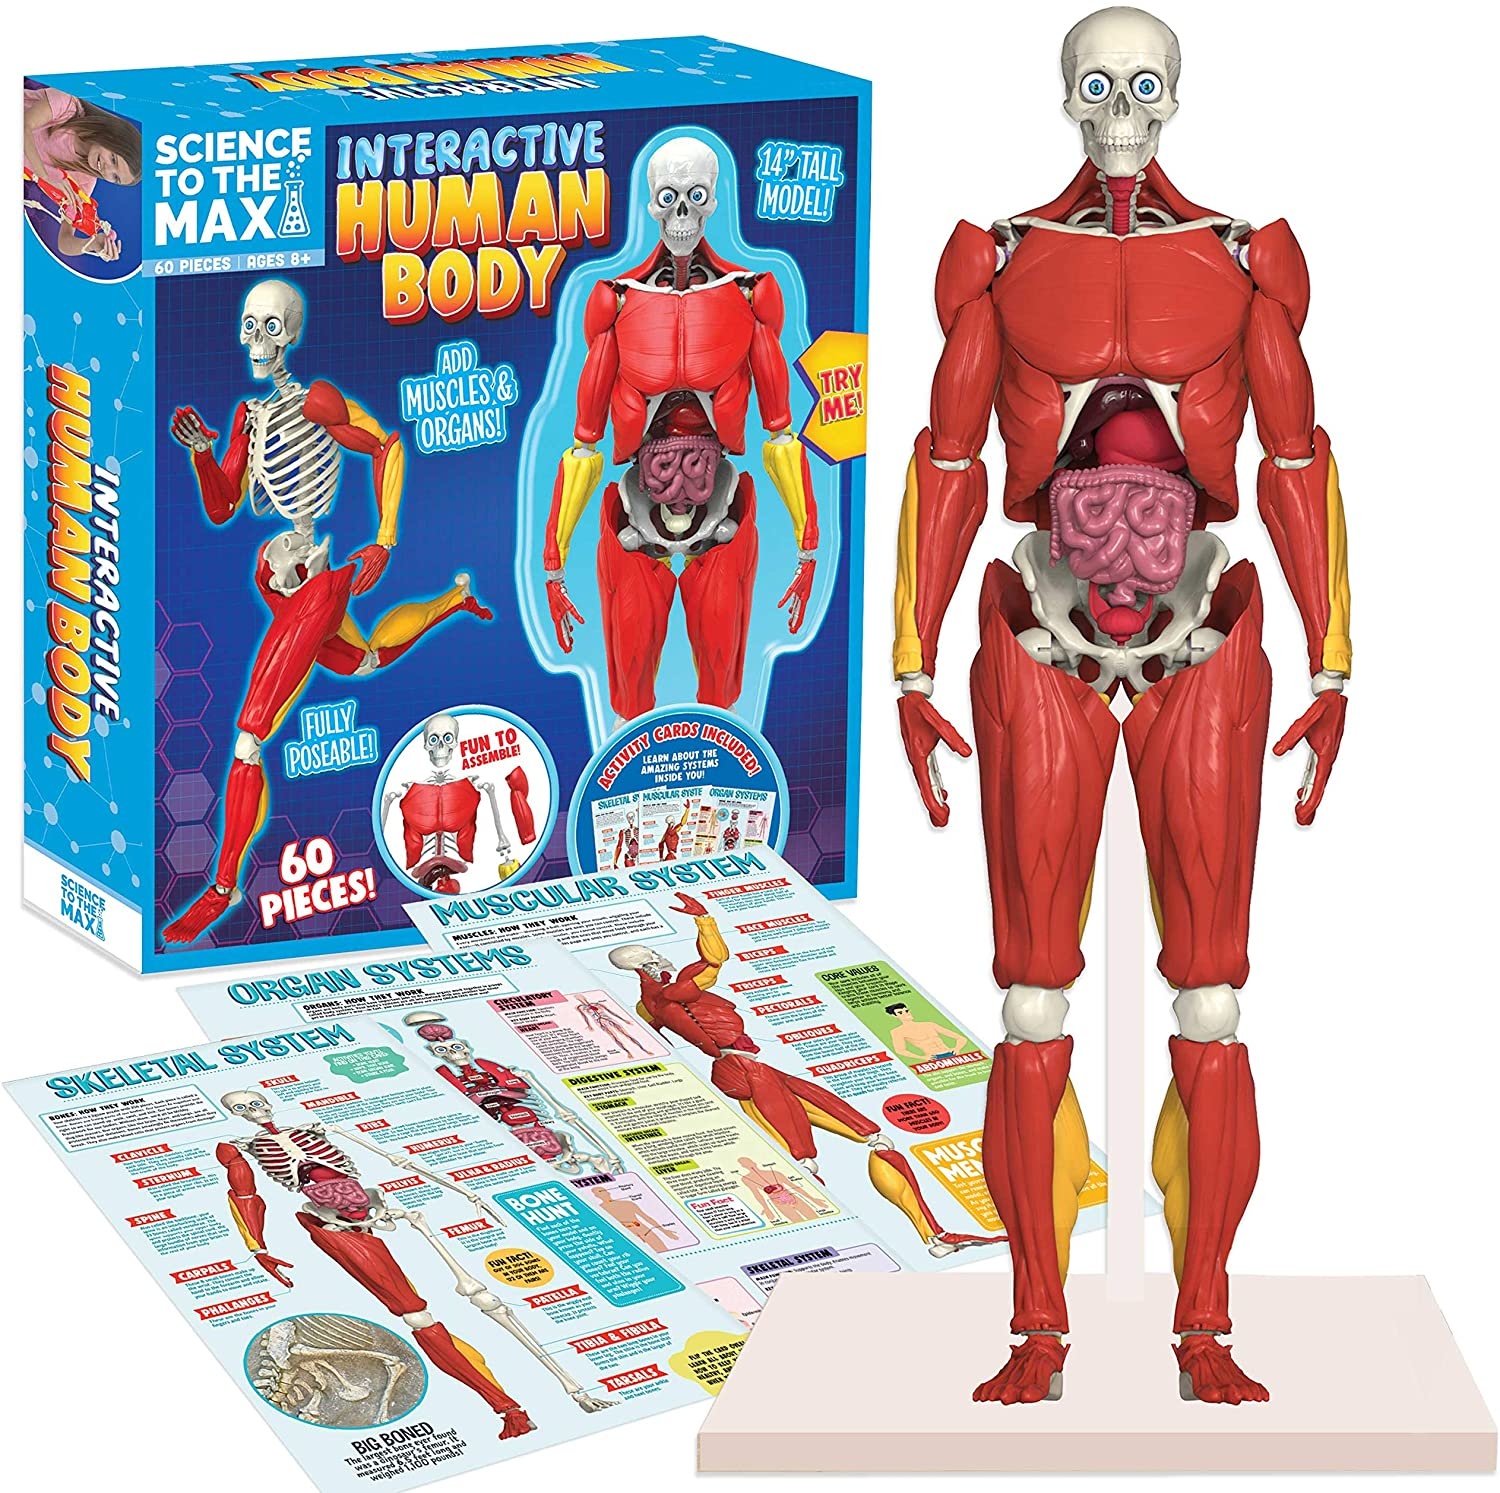 INTERACTIVE HUMAN BODY THE TOY STORE